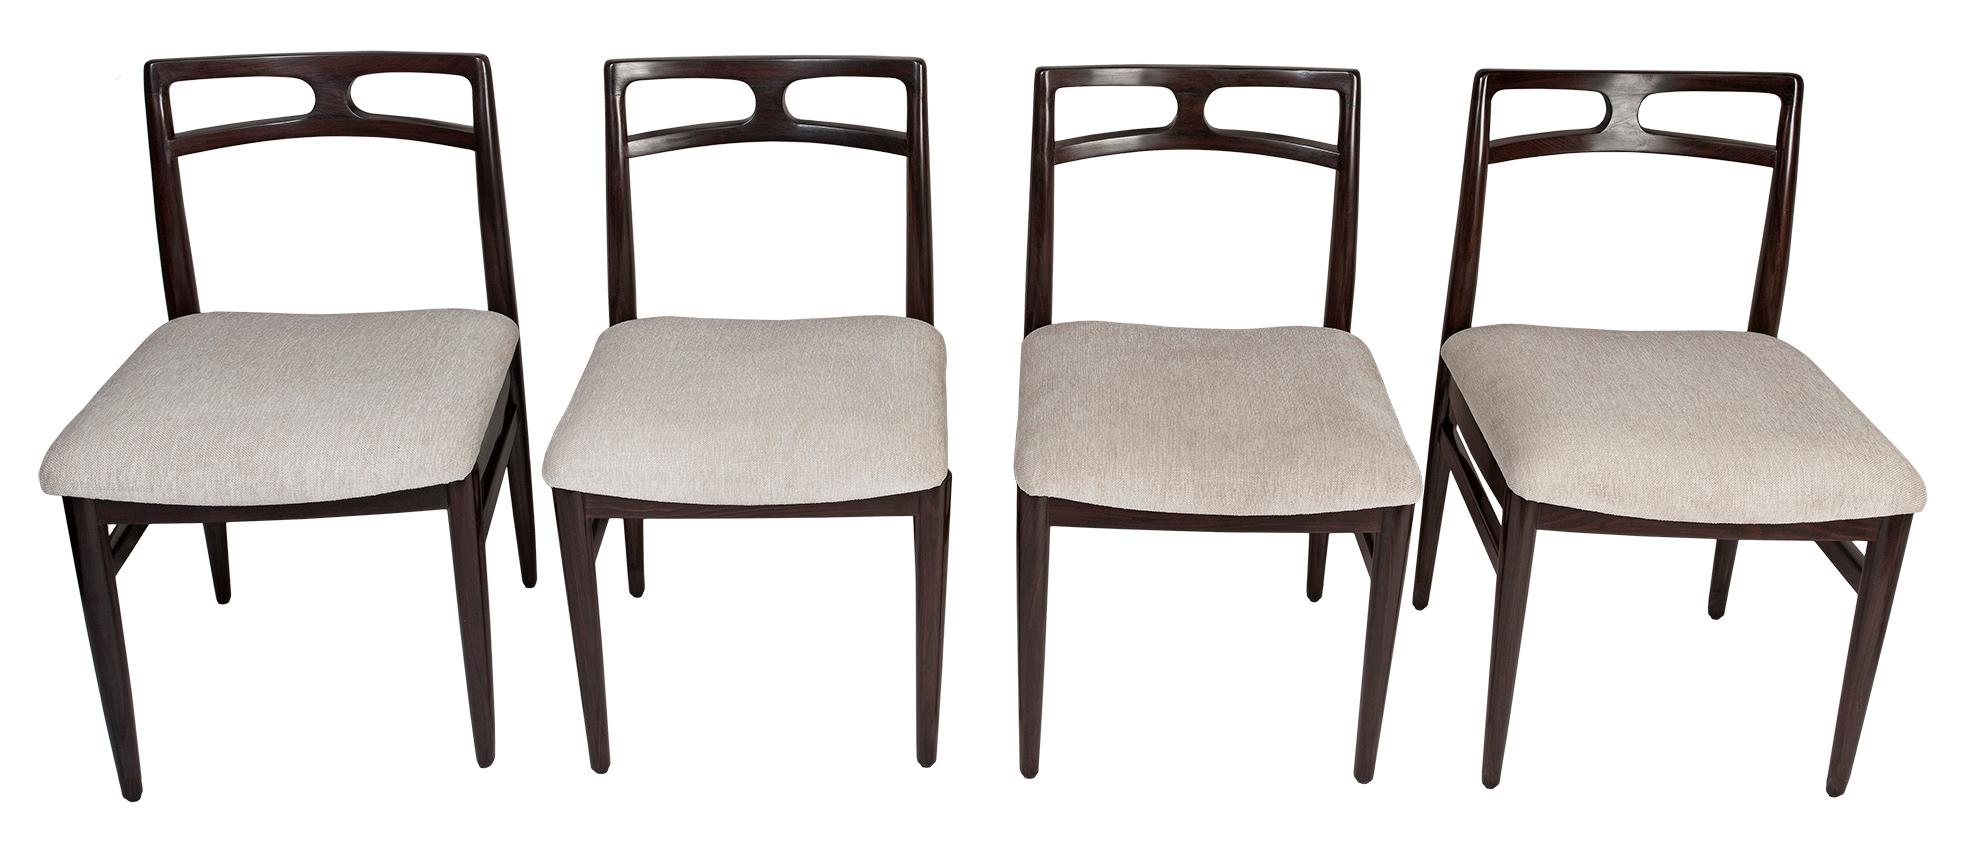 Danish Set of 8 Mid-Century Modern Rosewood Dining Chairs by Johannes Andersen, Denmark